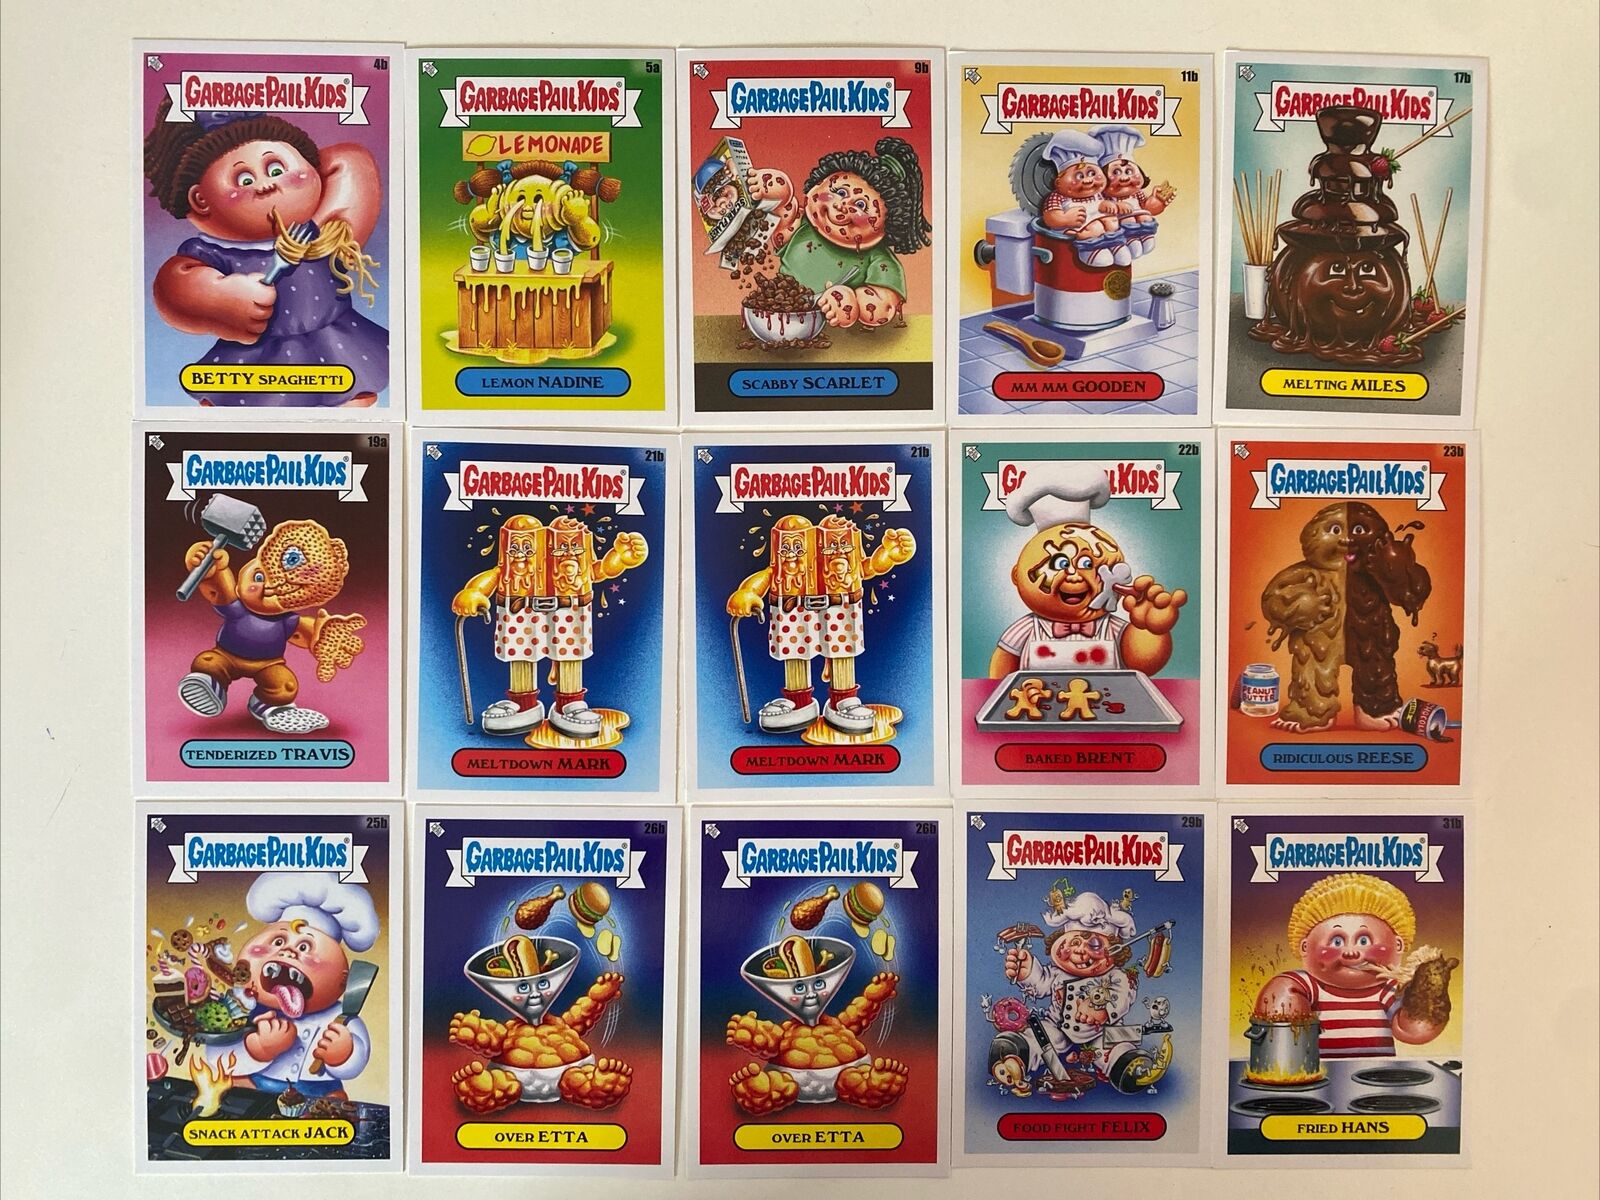 Topps 2021 Garbage Pail Kids - Checklists a&b - 56 Total Cards